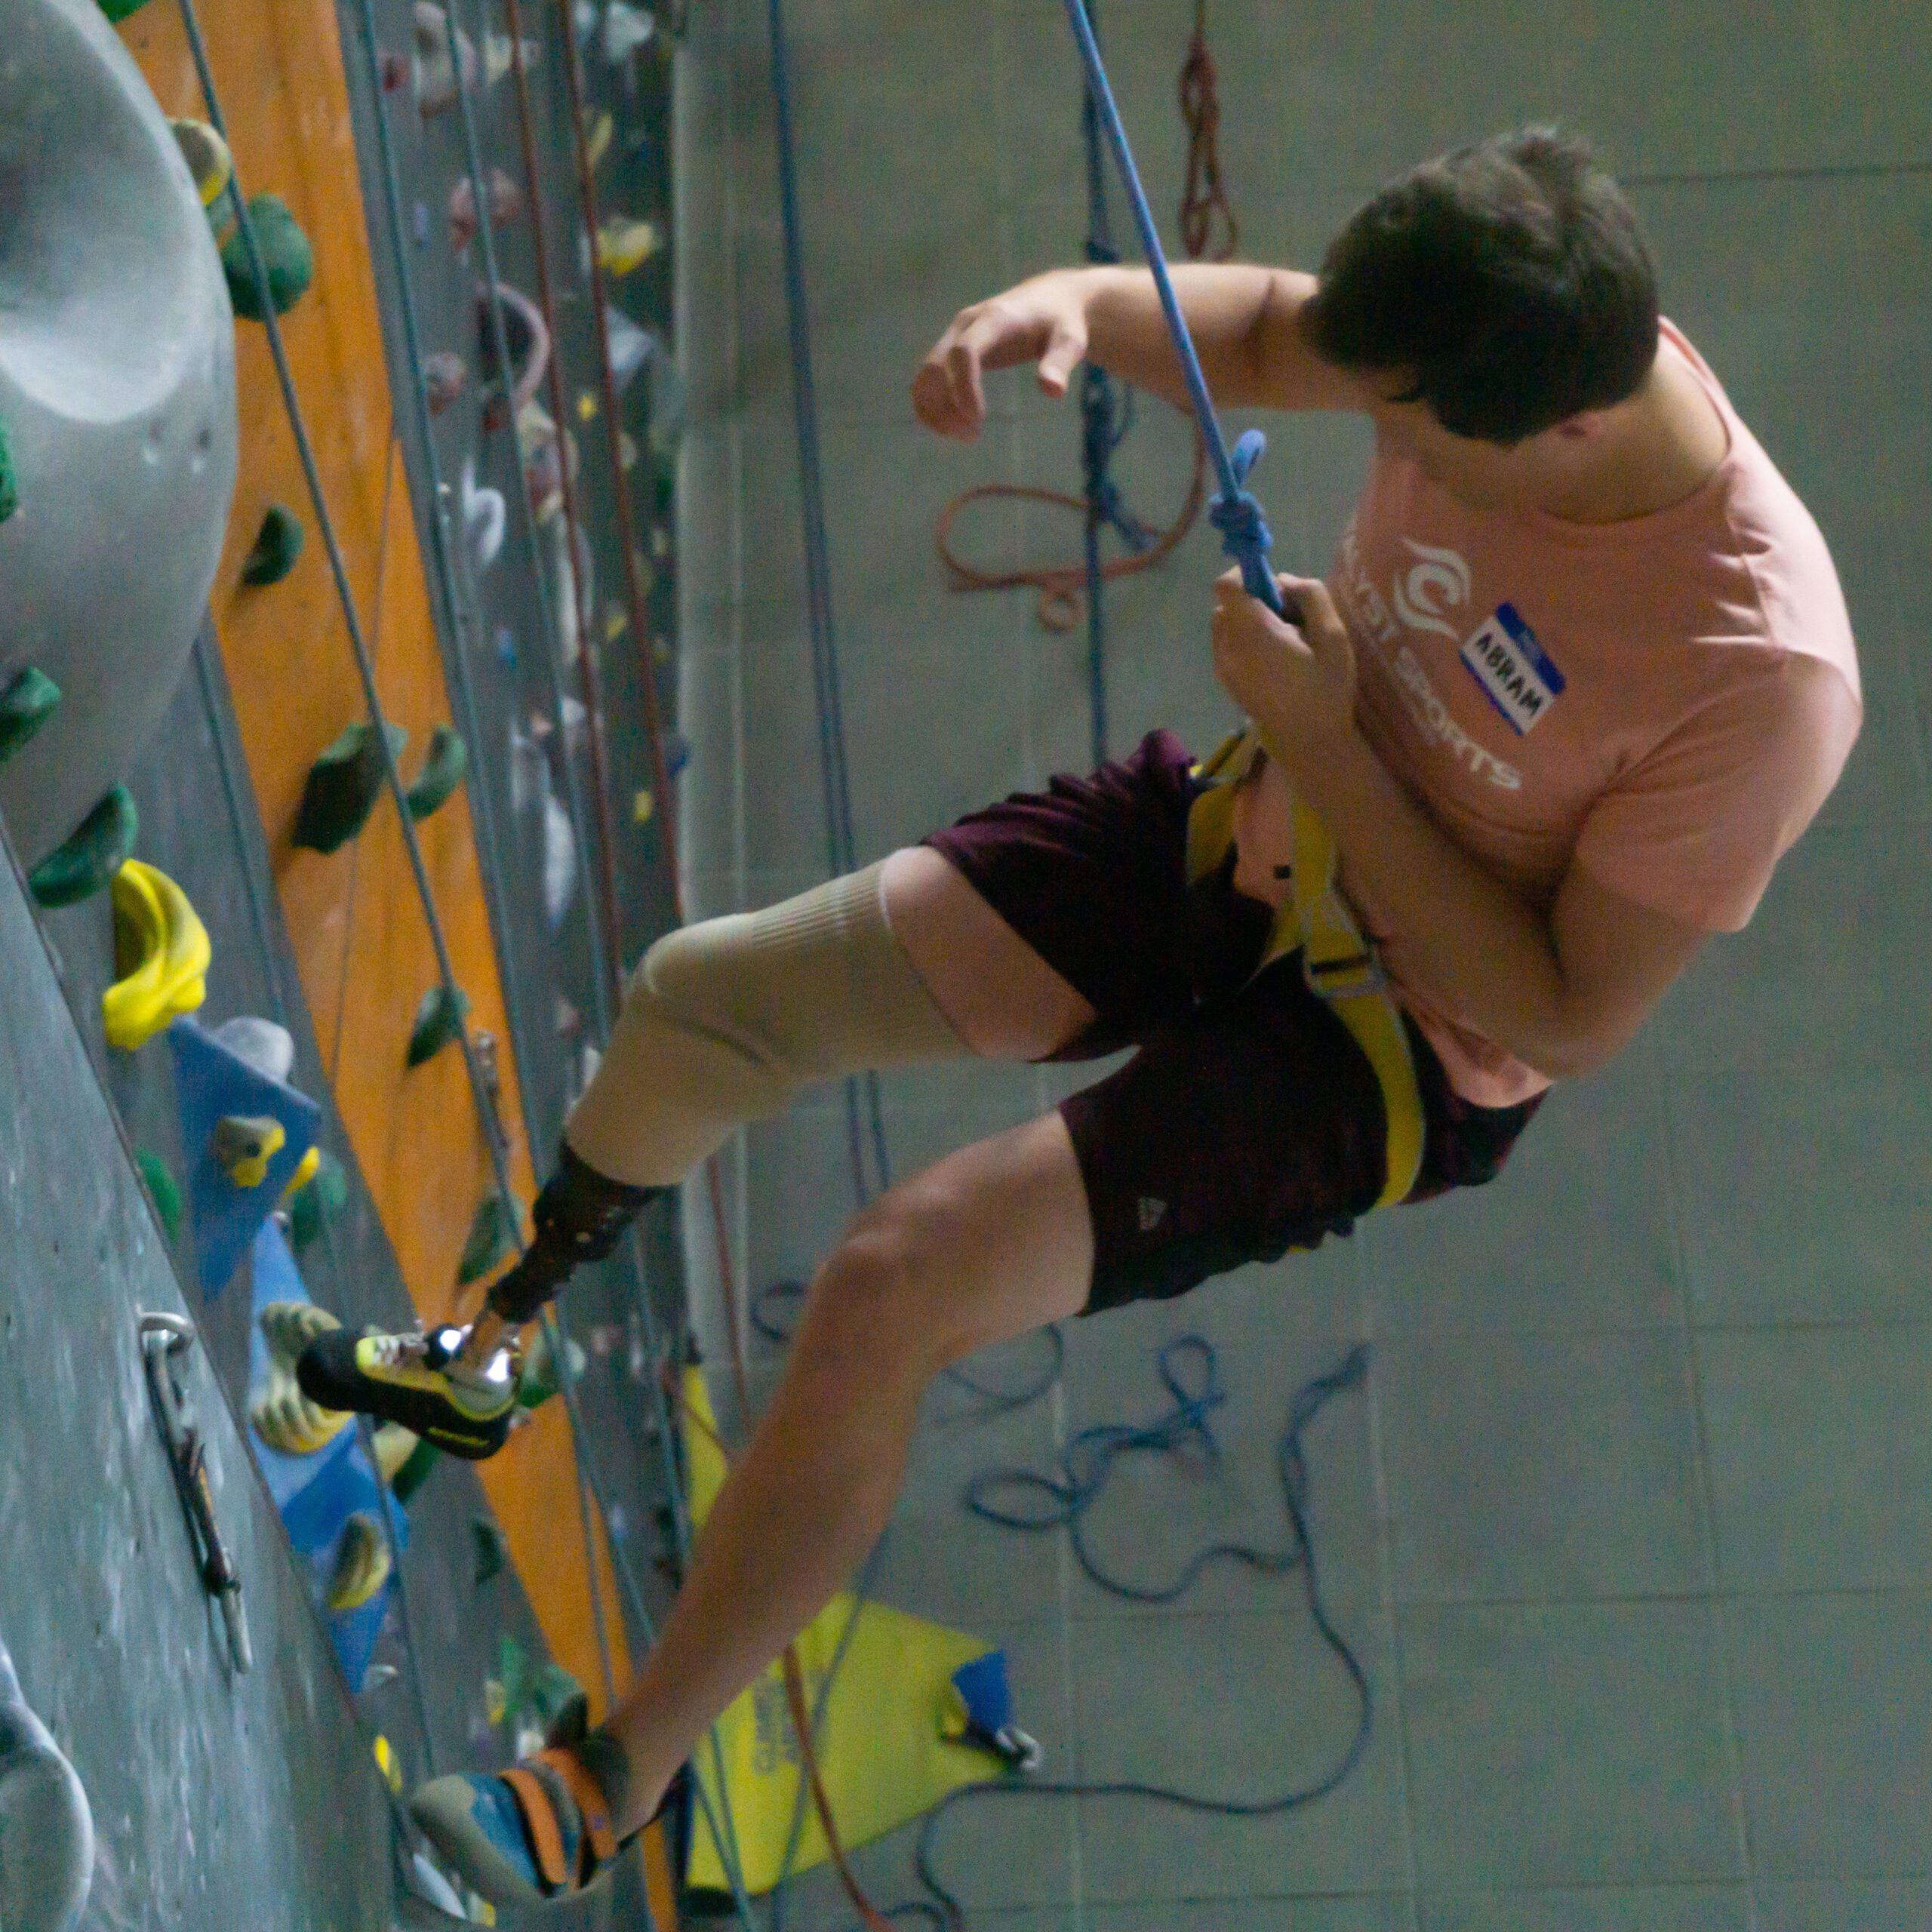 Conquer the Heights with High Point Climbing And Fitness Birmingham Birmingham Al: Power Up Your Adventure